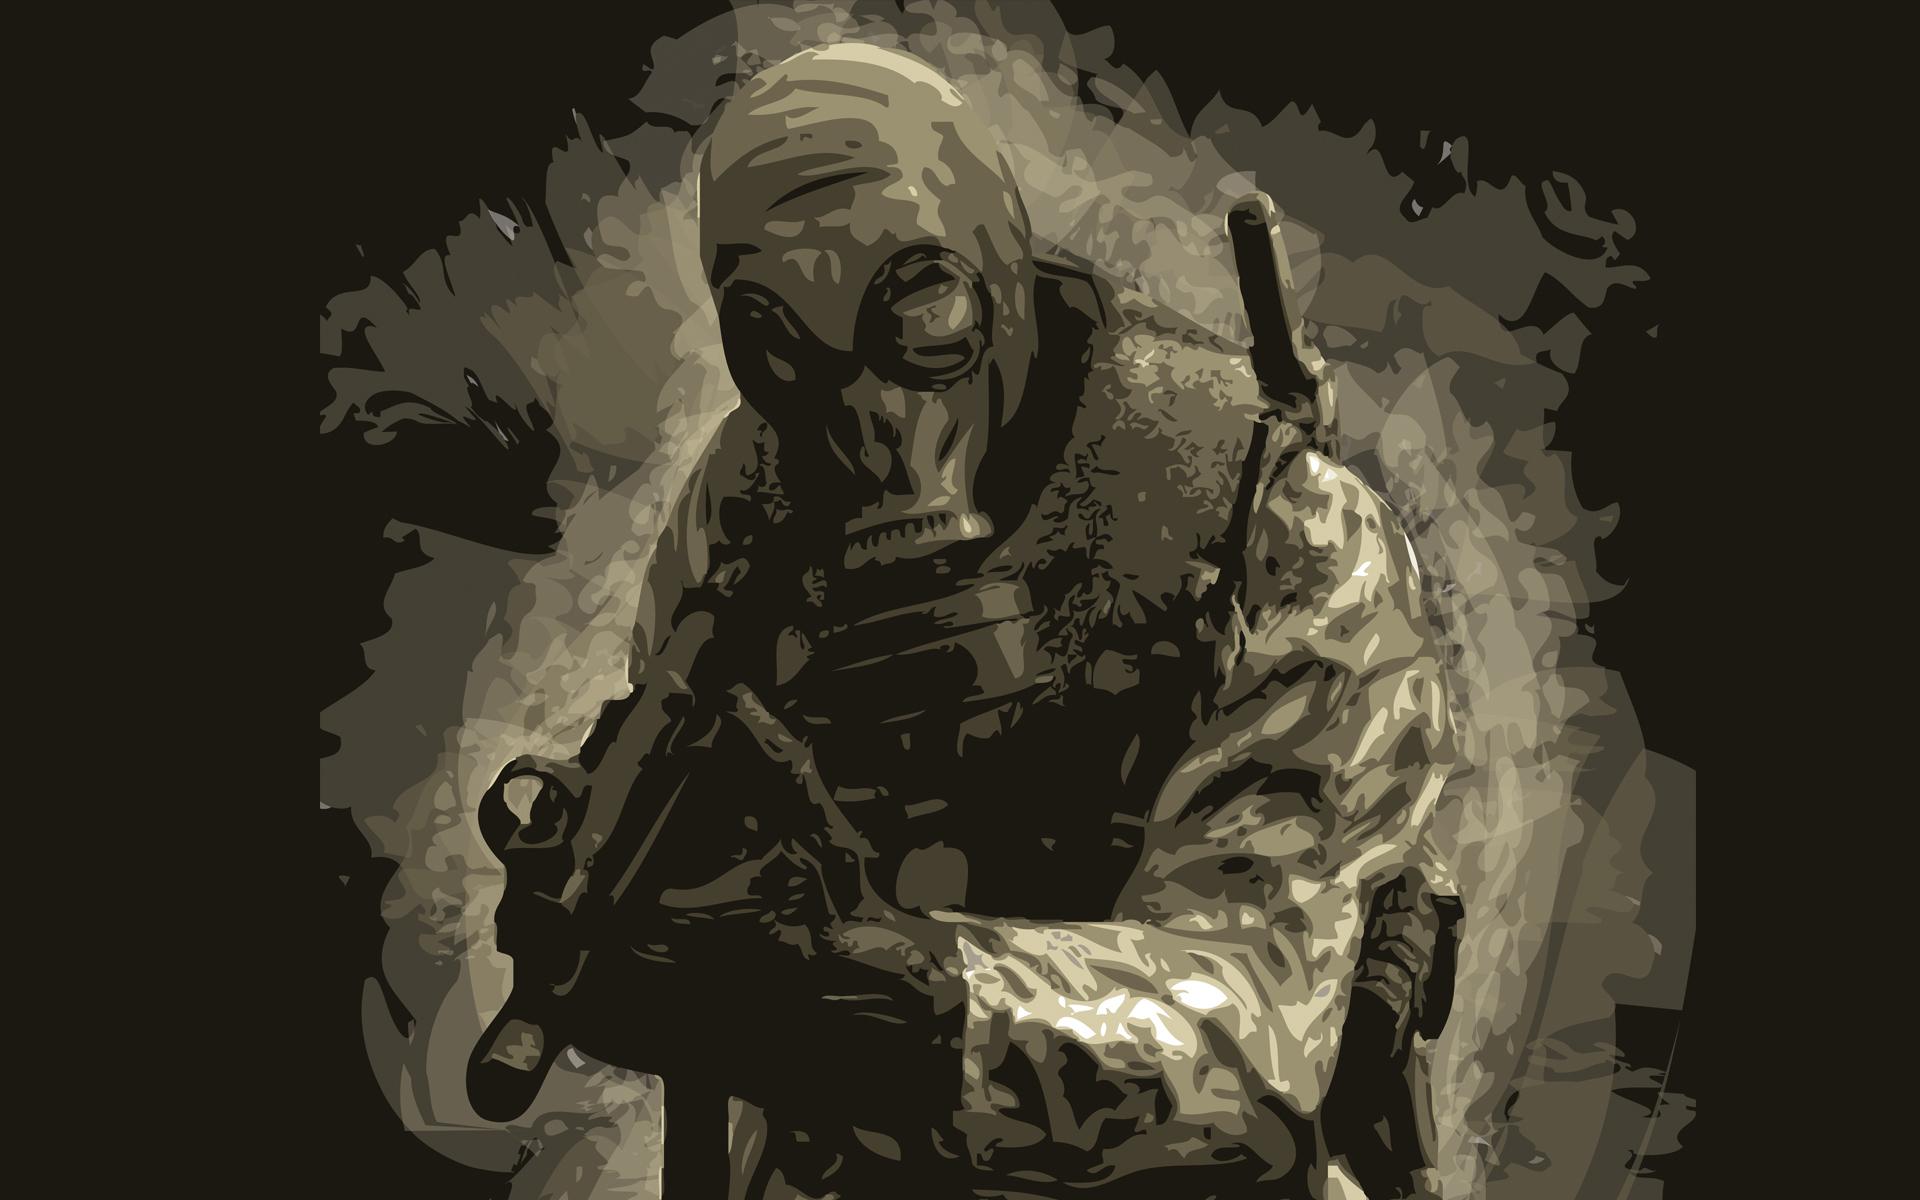 Gas Mask Soldier Drawing.com. Free for personal use